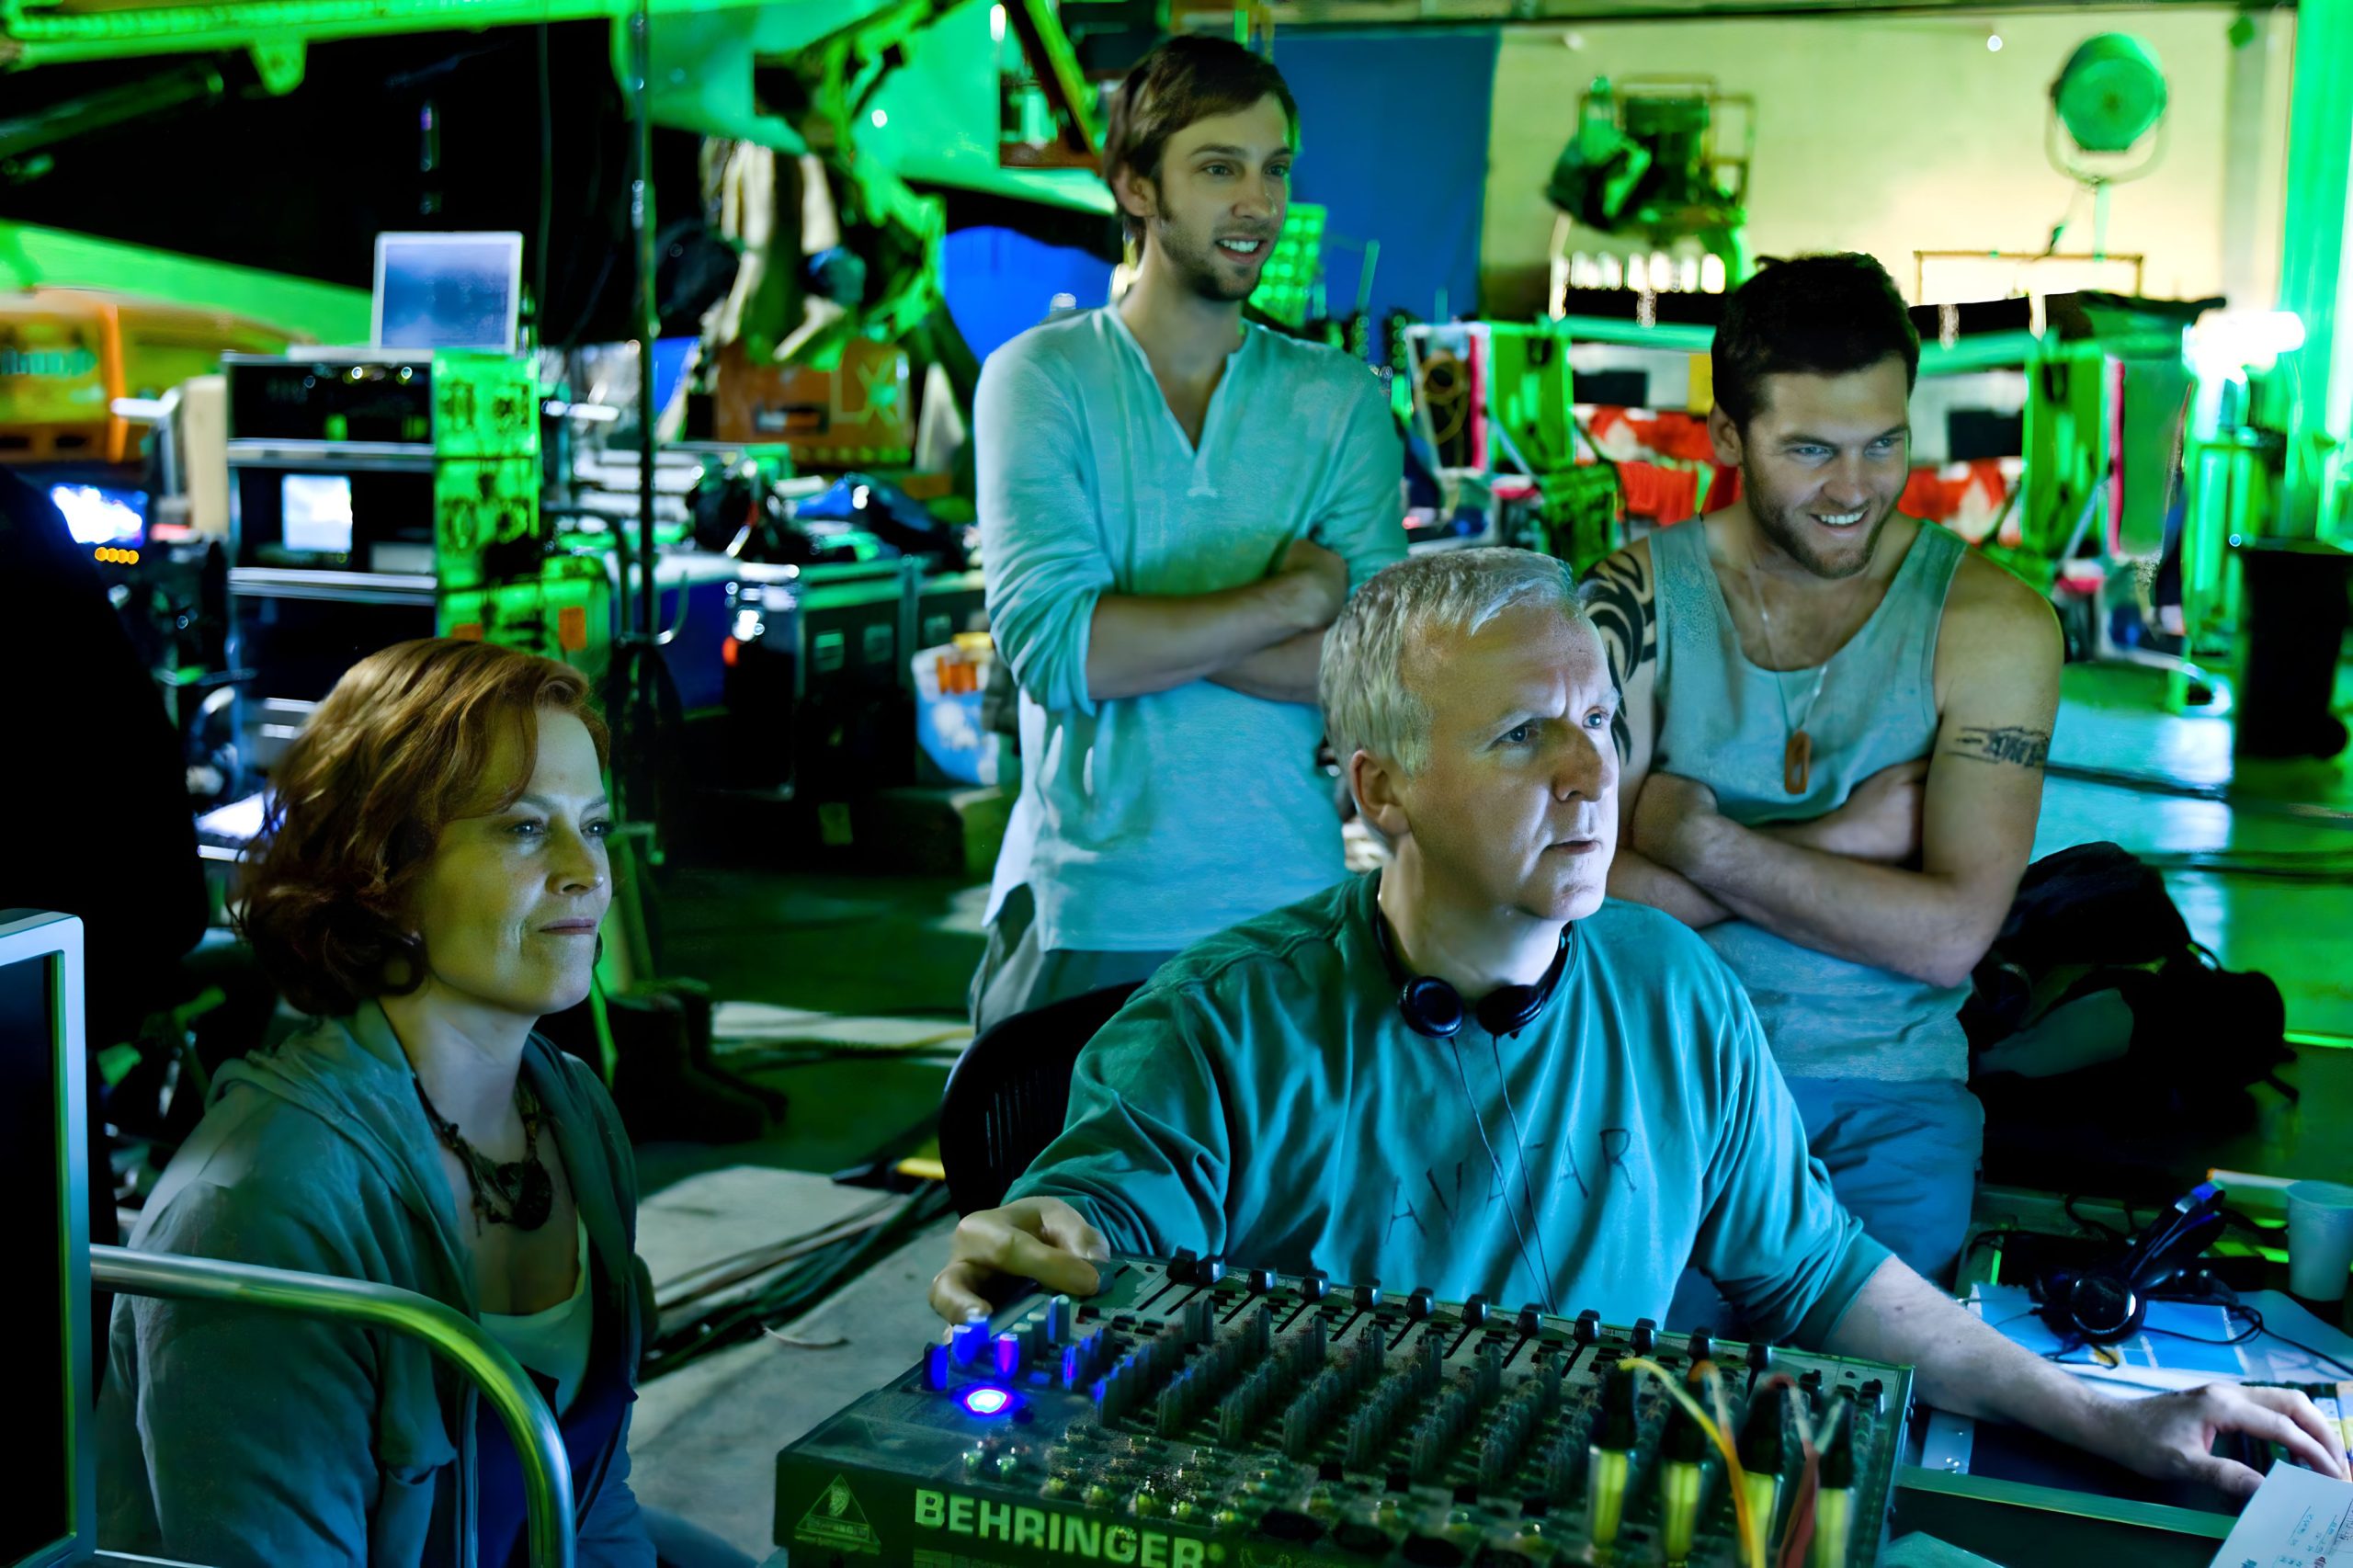 James Cameron: Directing Only Avatar Films Won't Ruin My Career